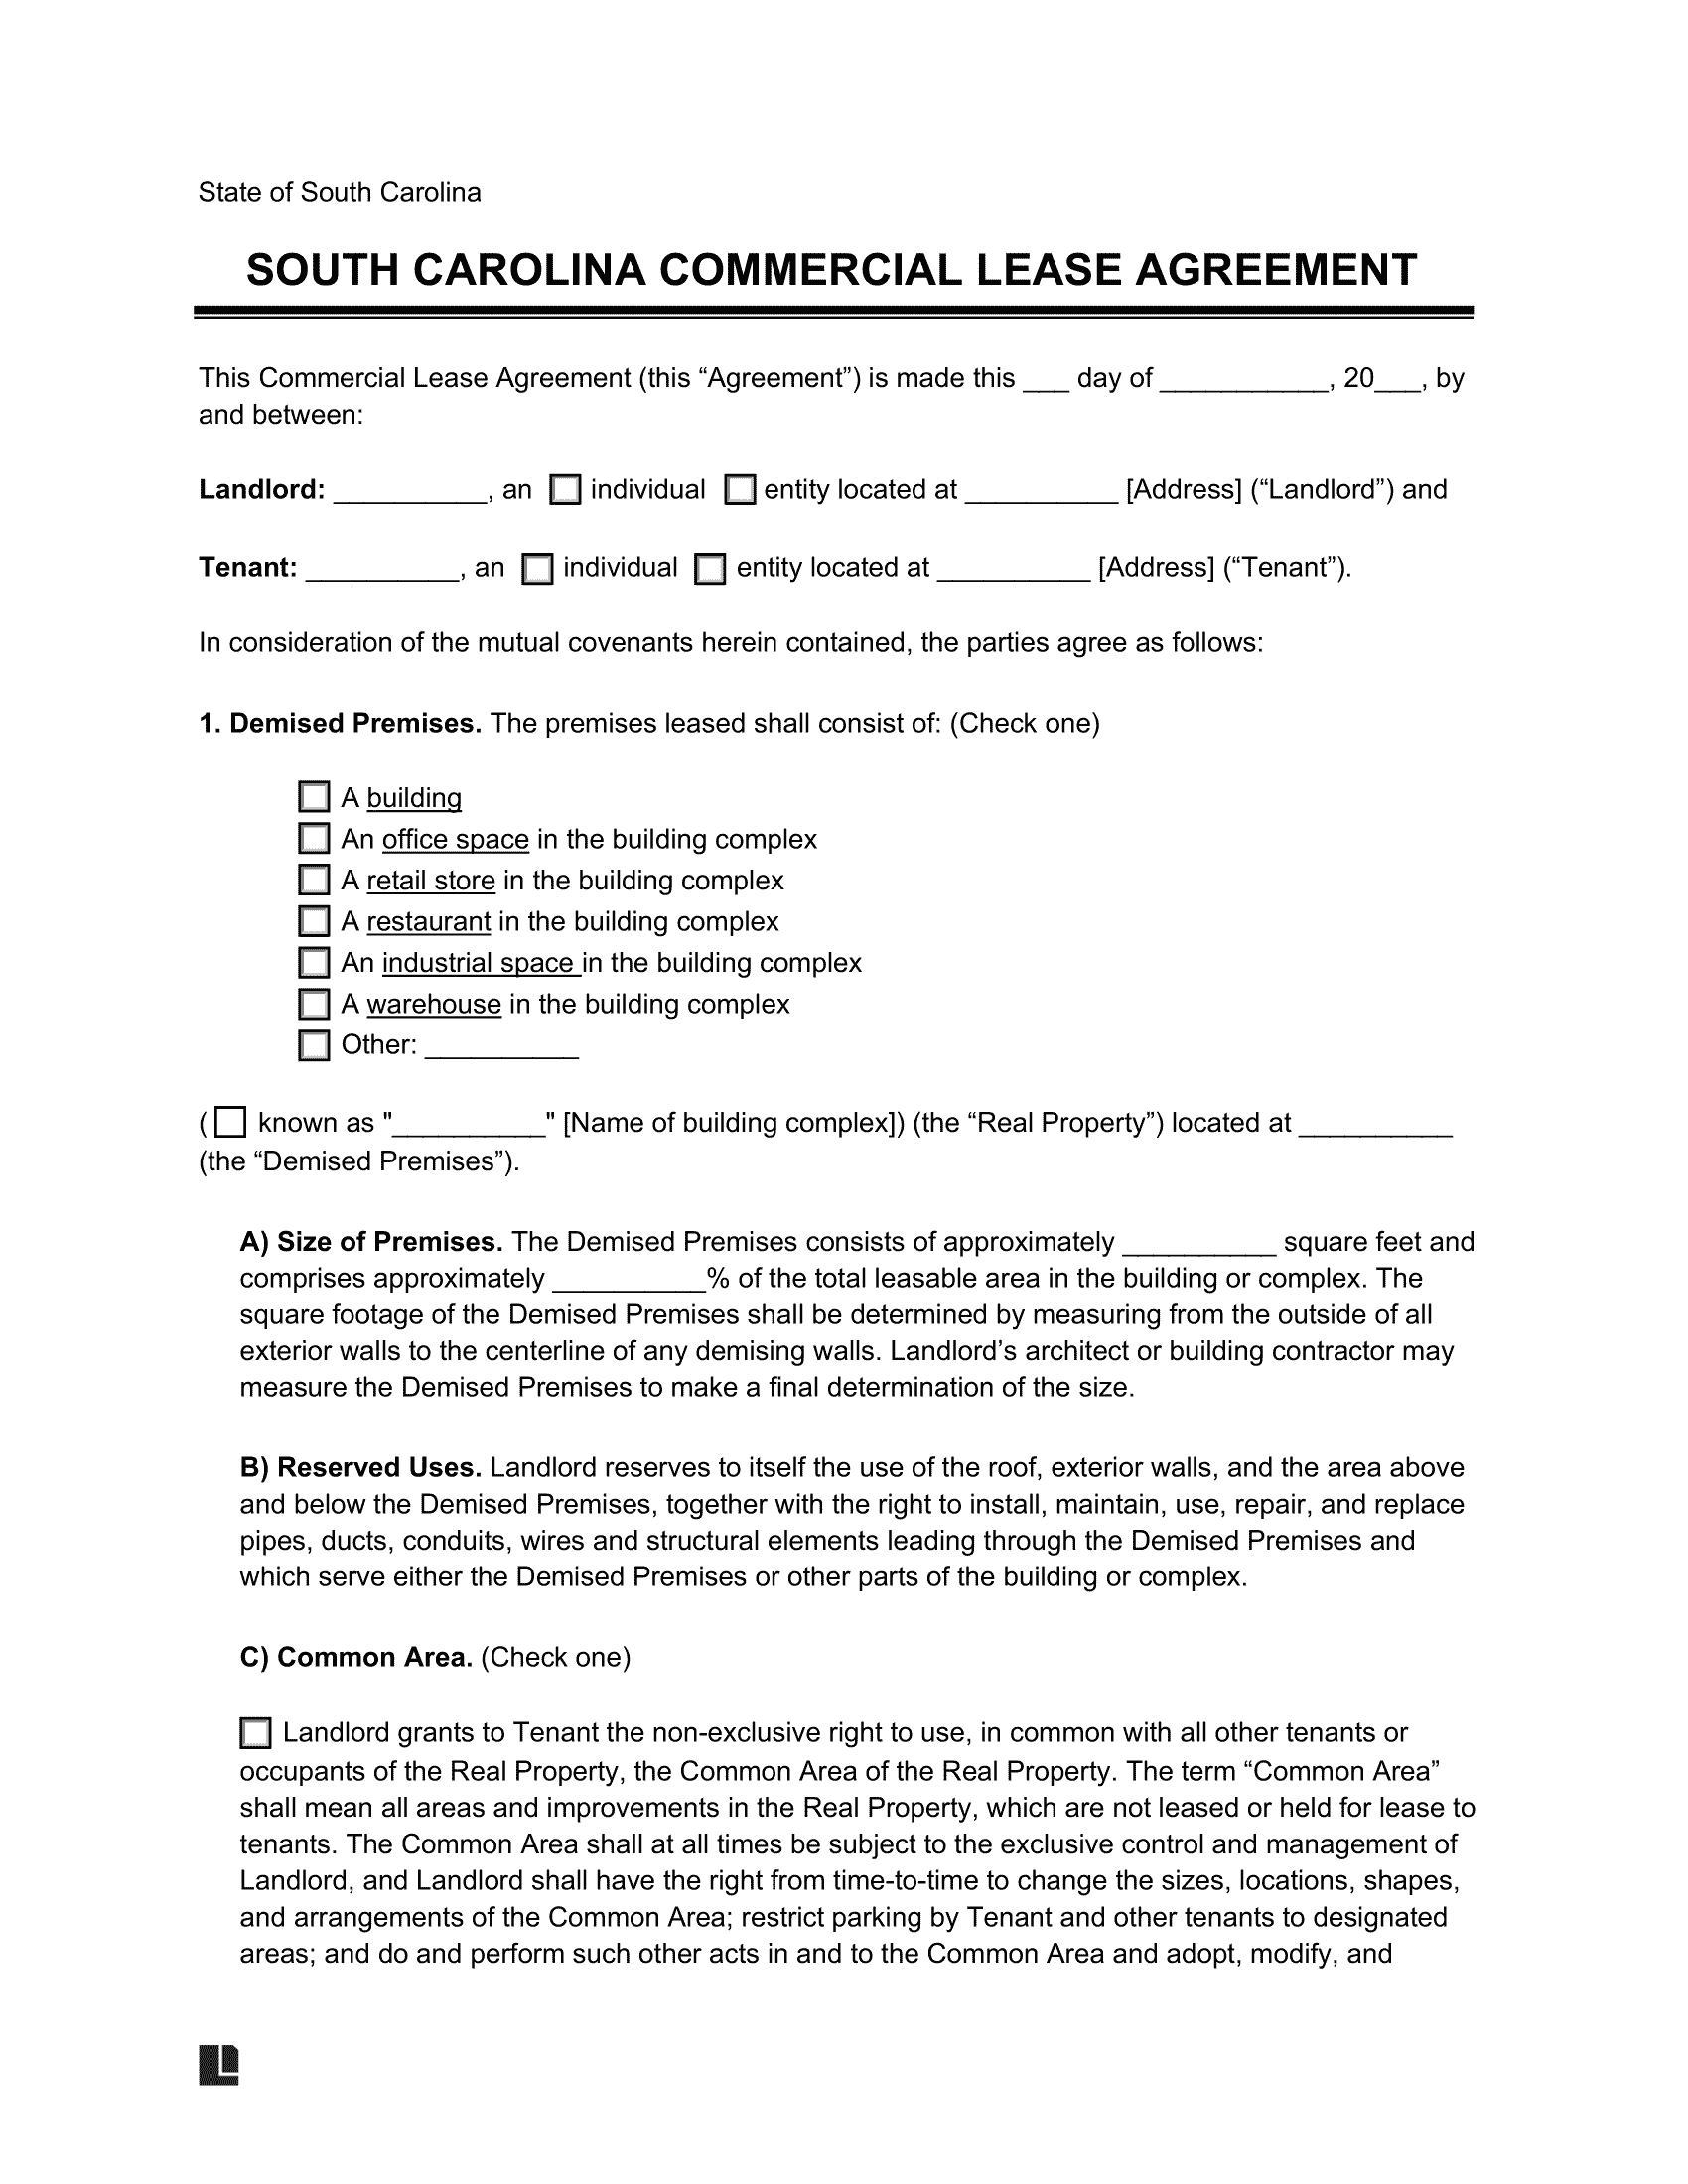 South Carolina Commercial Lease Agreement